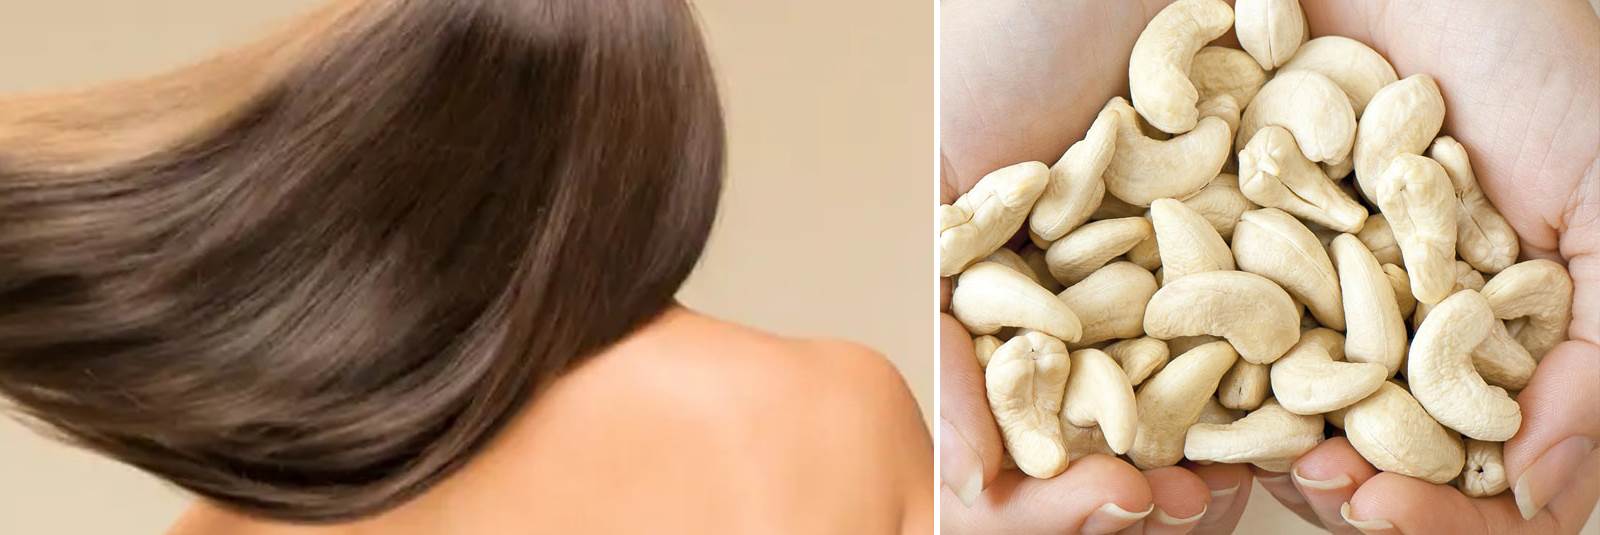 The Cashew Kernels are GOOD for Your Skin Heathy. Beautiful skin is a dream of many women.